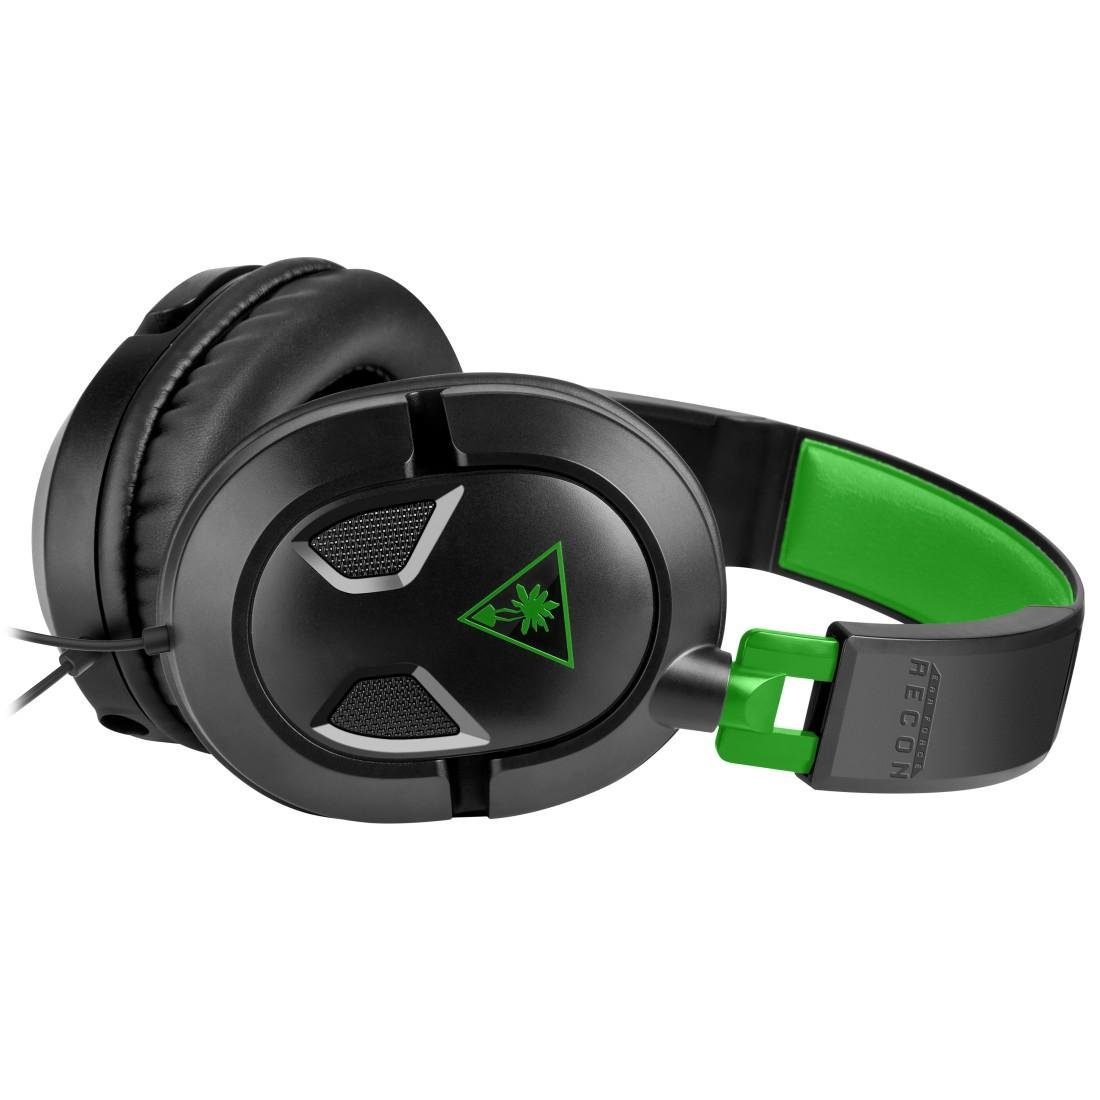 Beach mit Gaming-Headset 50X Gaming-Headset Over-Ear Stereo Turtle hohem (Mikrofon Tragekomfort abnehmbar), Recon